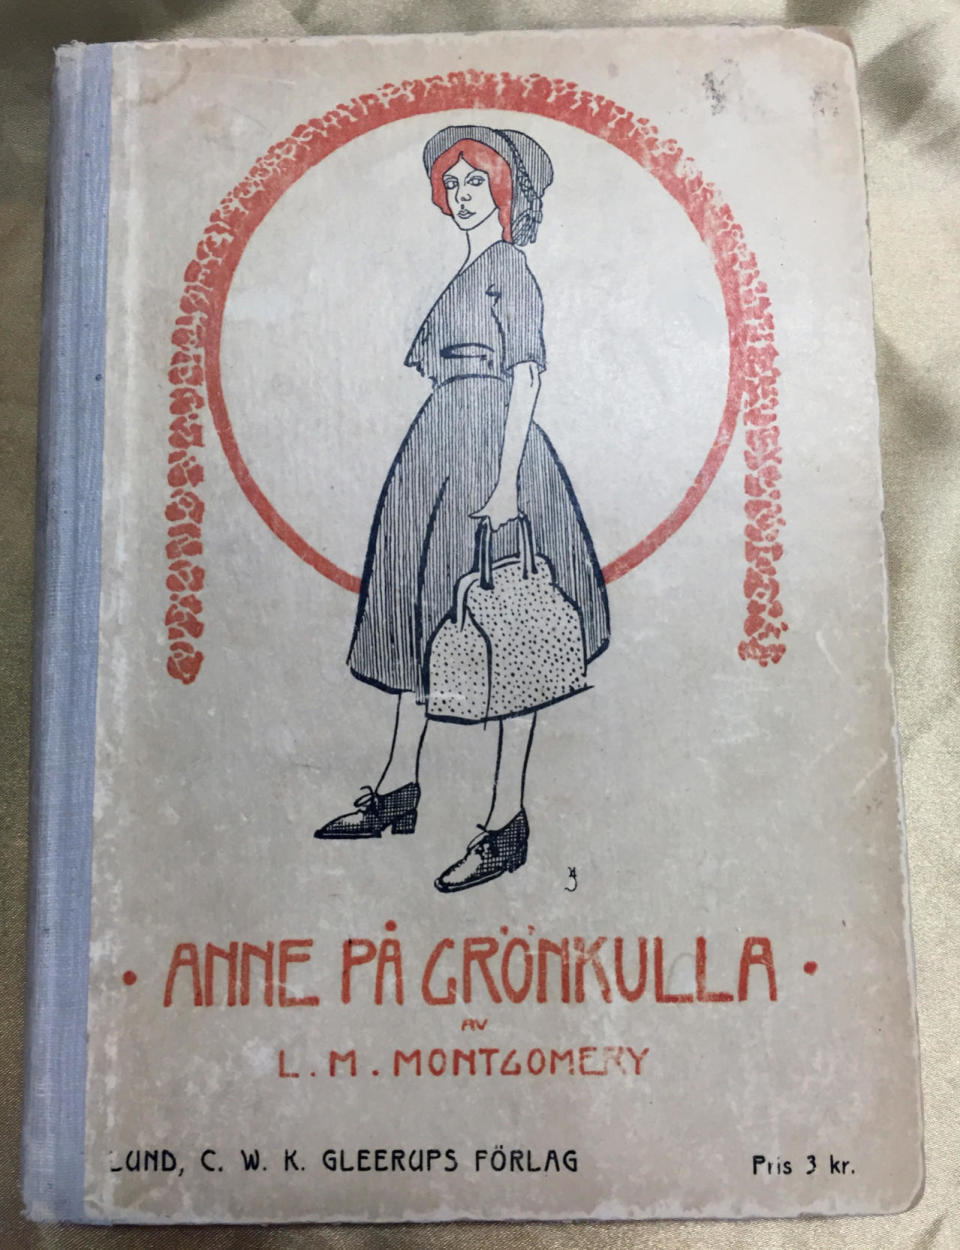 Anne’s impact beyond North America started right away. This 1909 Swedish edition was printed the year following the first run in English. The collections at the University of Prince Edward Island alone include translations into 20 languages.